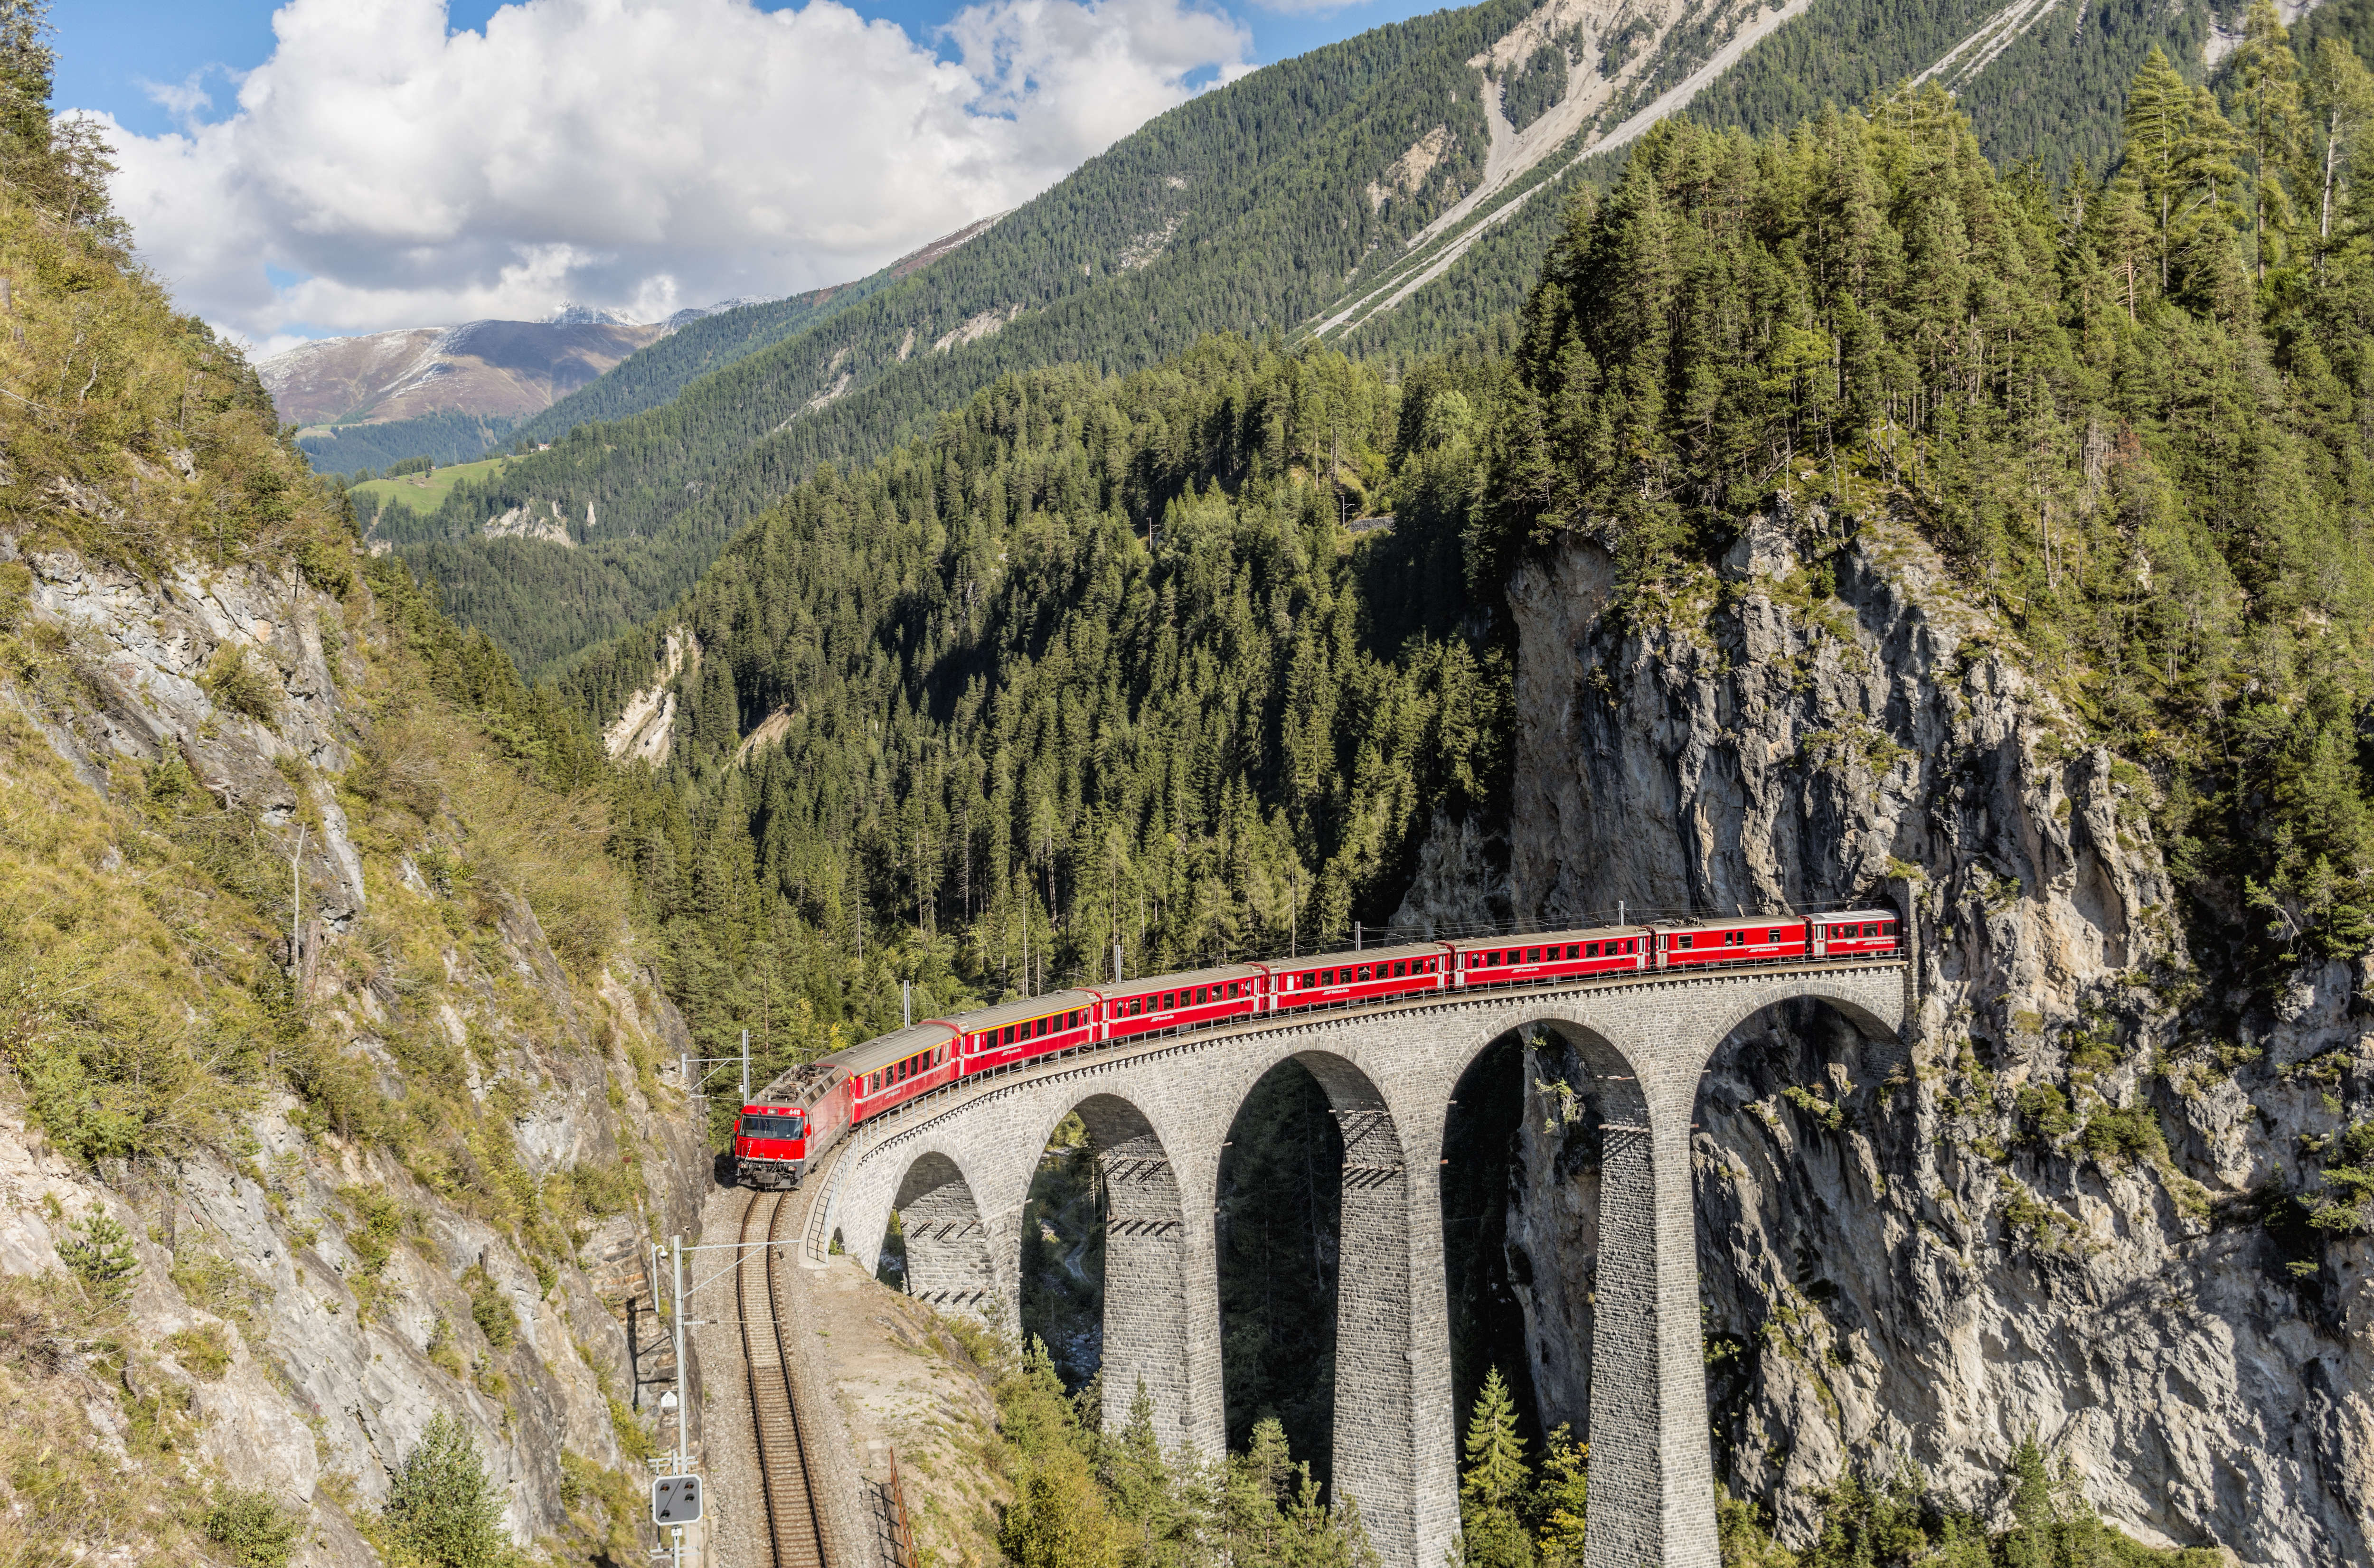 GRISONS, SWITZERLAND - 2015/09/26: Express Train at Landwasser Viaduct at the Swiss Alps. (Photo by Olaf Protze/LightRocket via Getty Images)